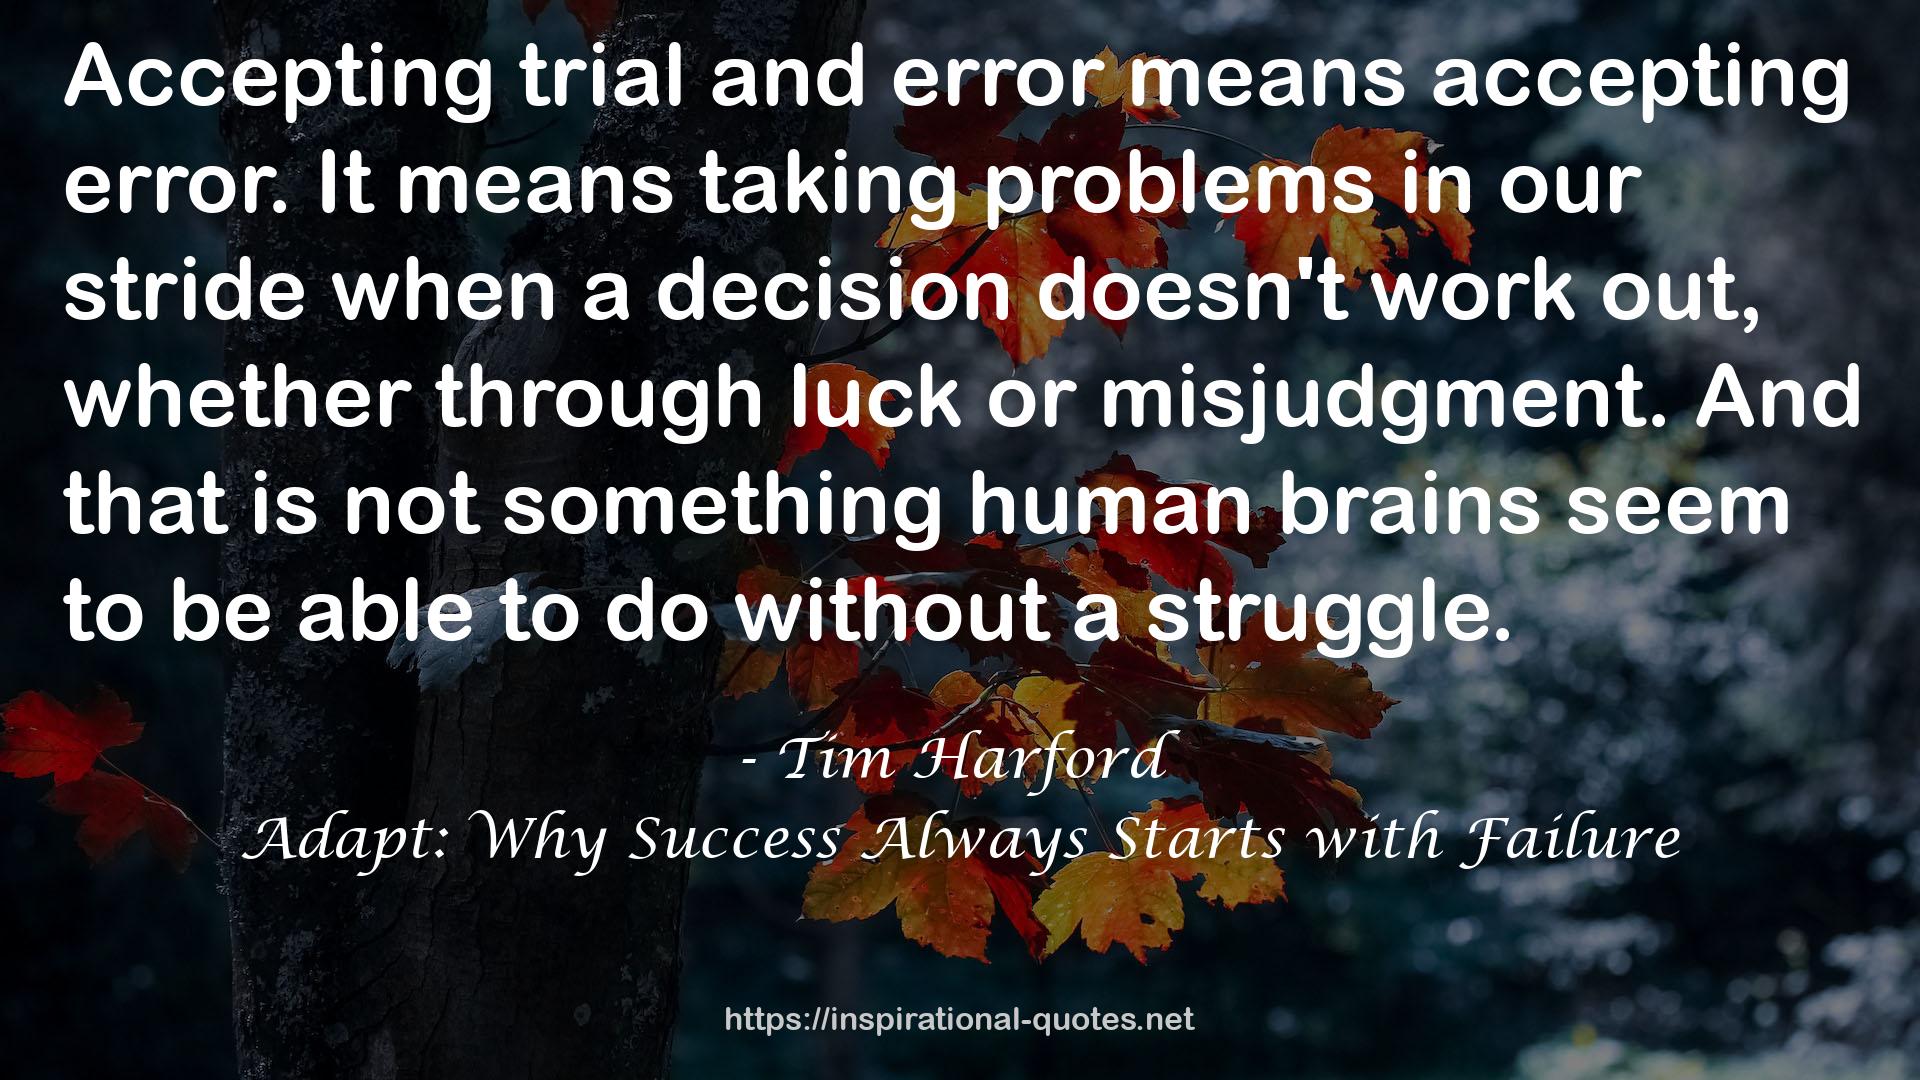 Adapt: Why Success Always Starts with Failure QUOTES